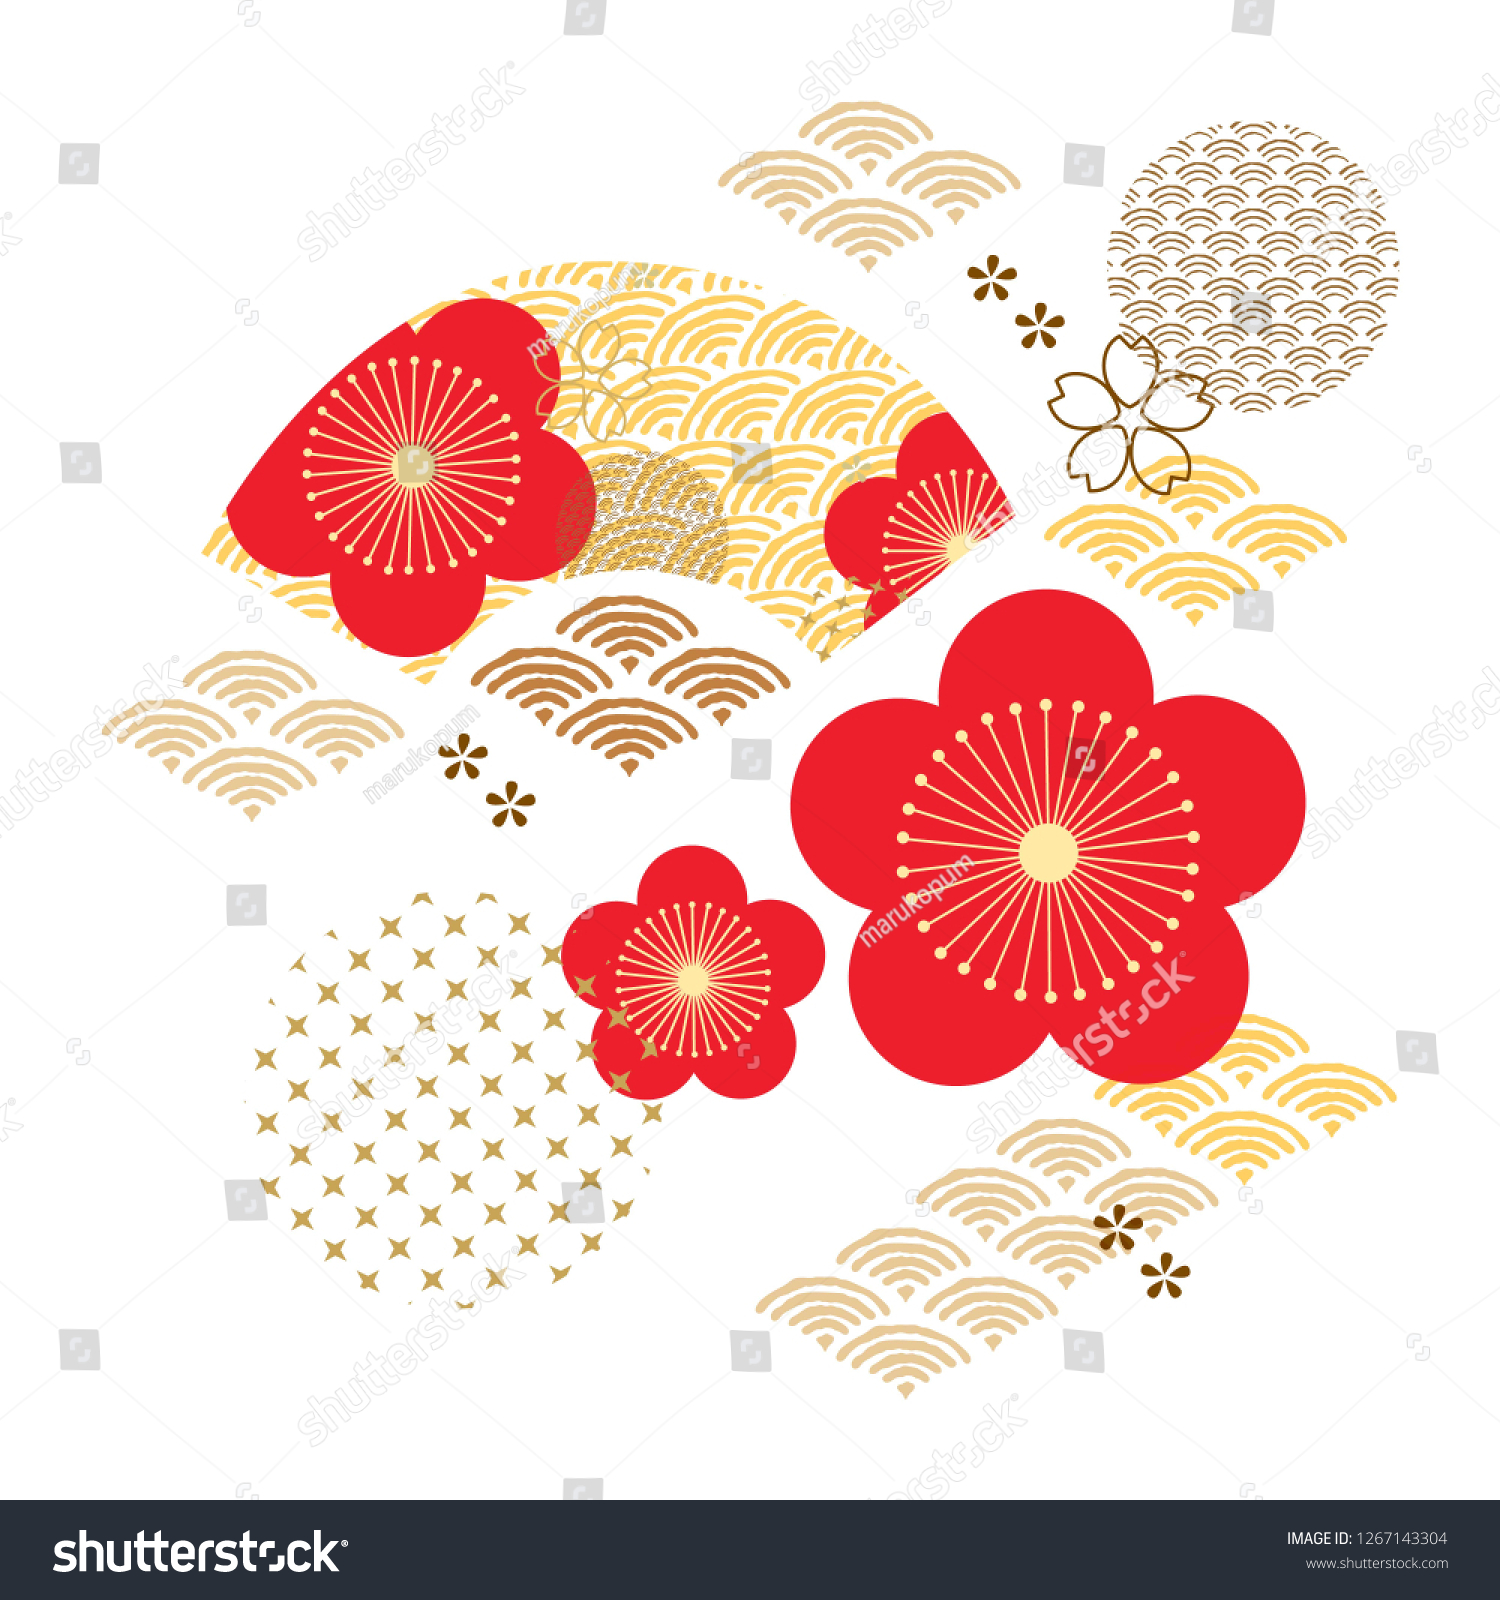 Cherry blossom with Japanese pattern vector. Red flower with wave elements template. #1267143304